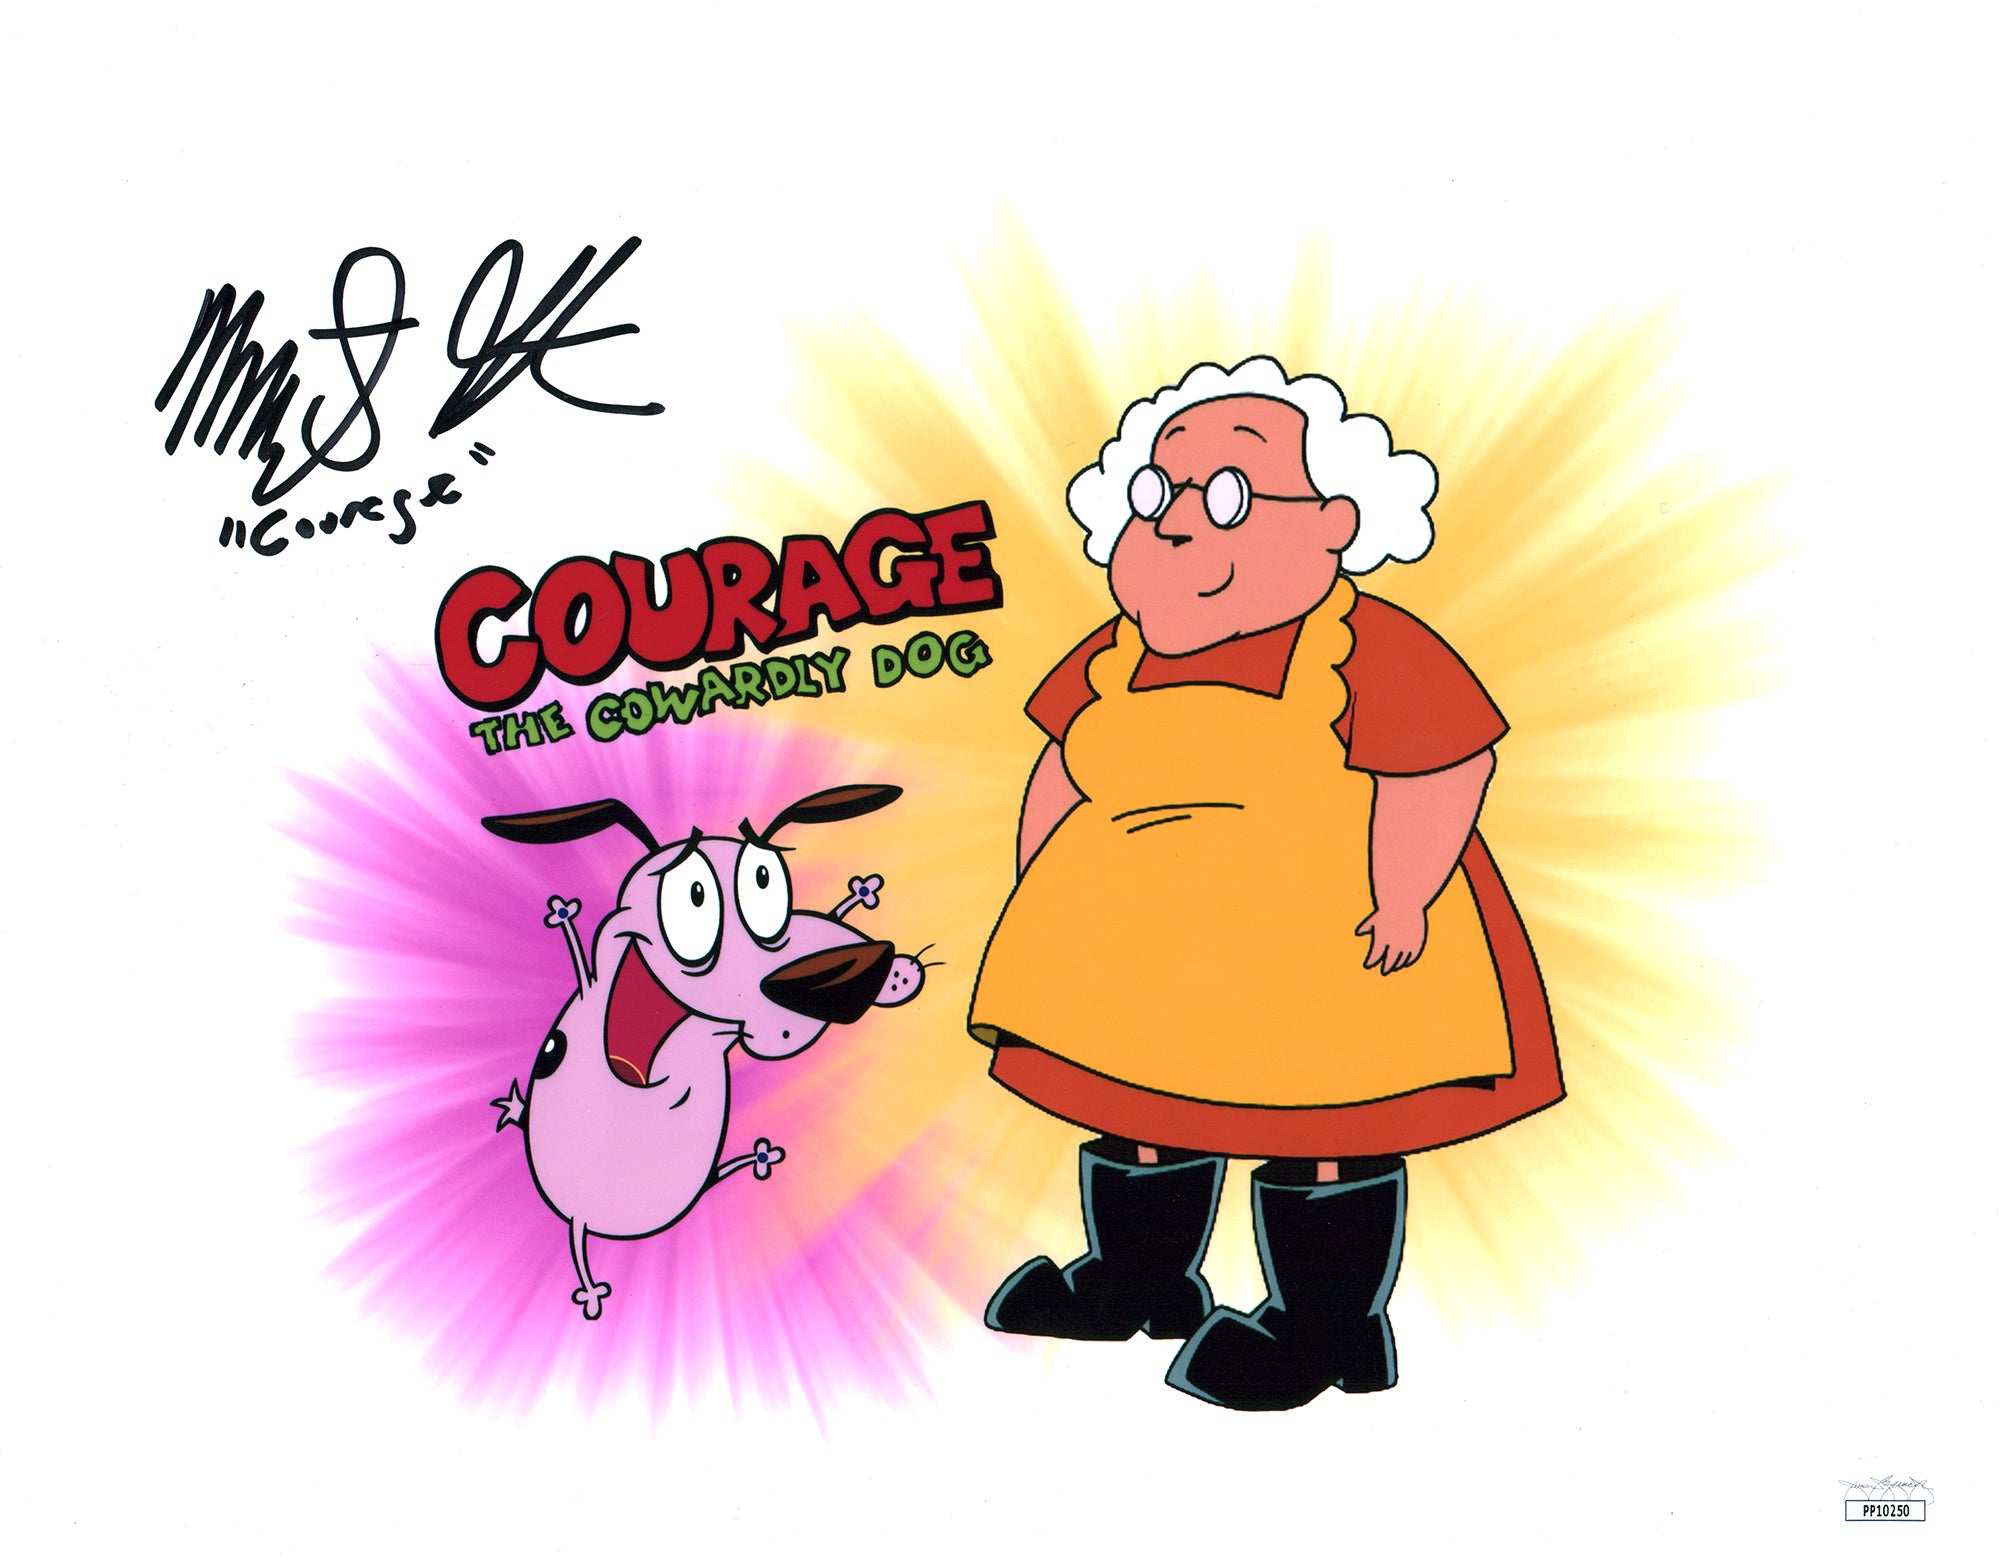 Marty Grabstein Courage the Cowardly Dog 11x14 Signed Photo Poster JSA COA Certified Autograph